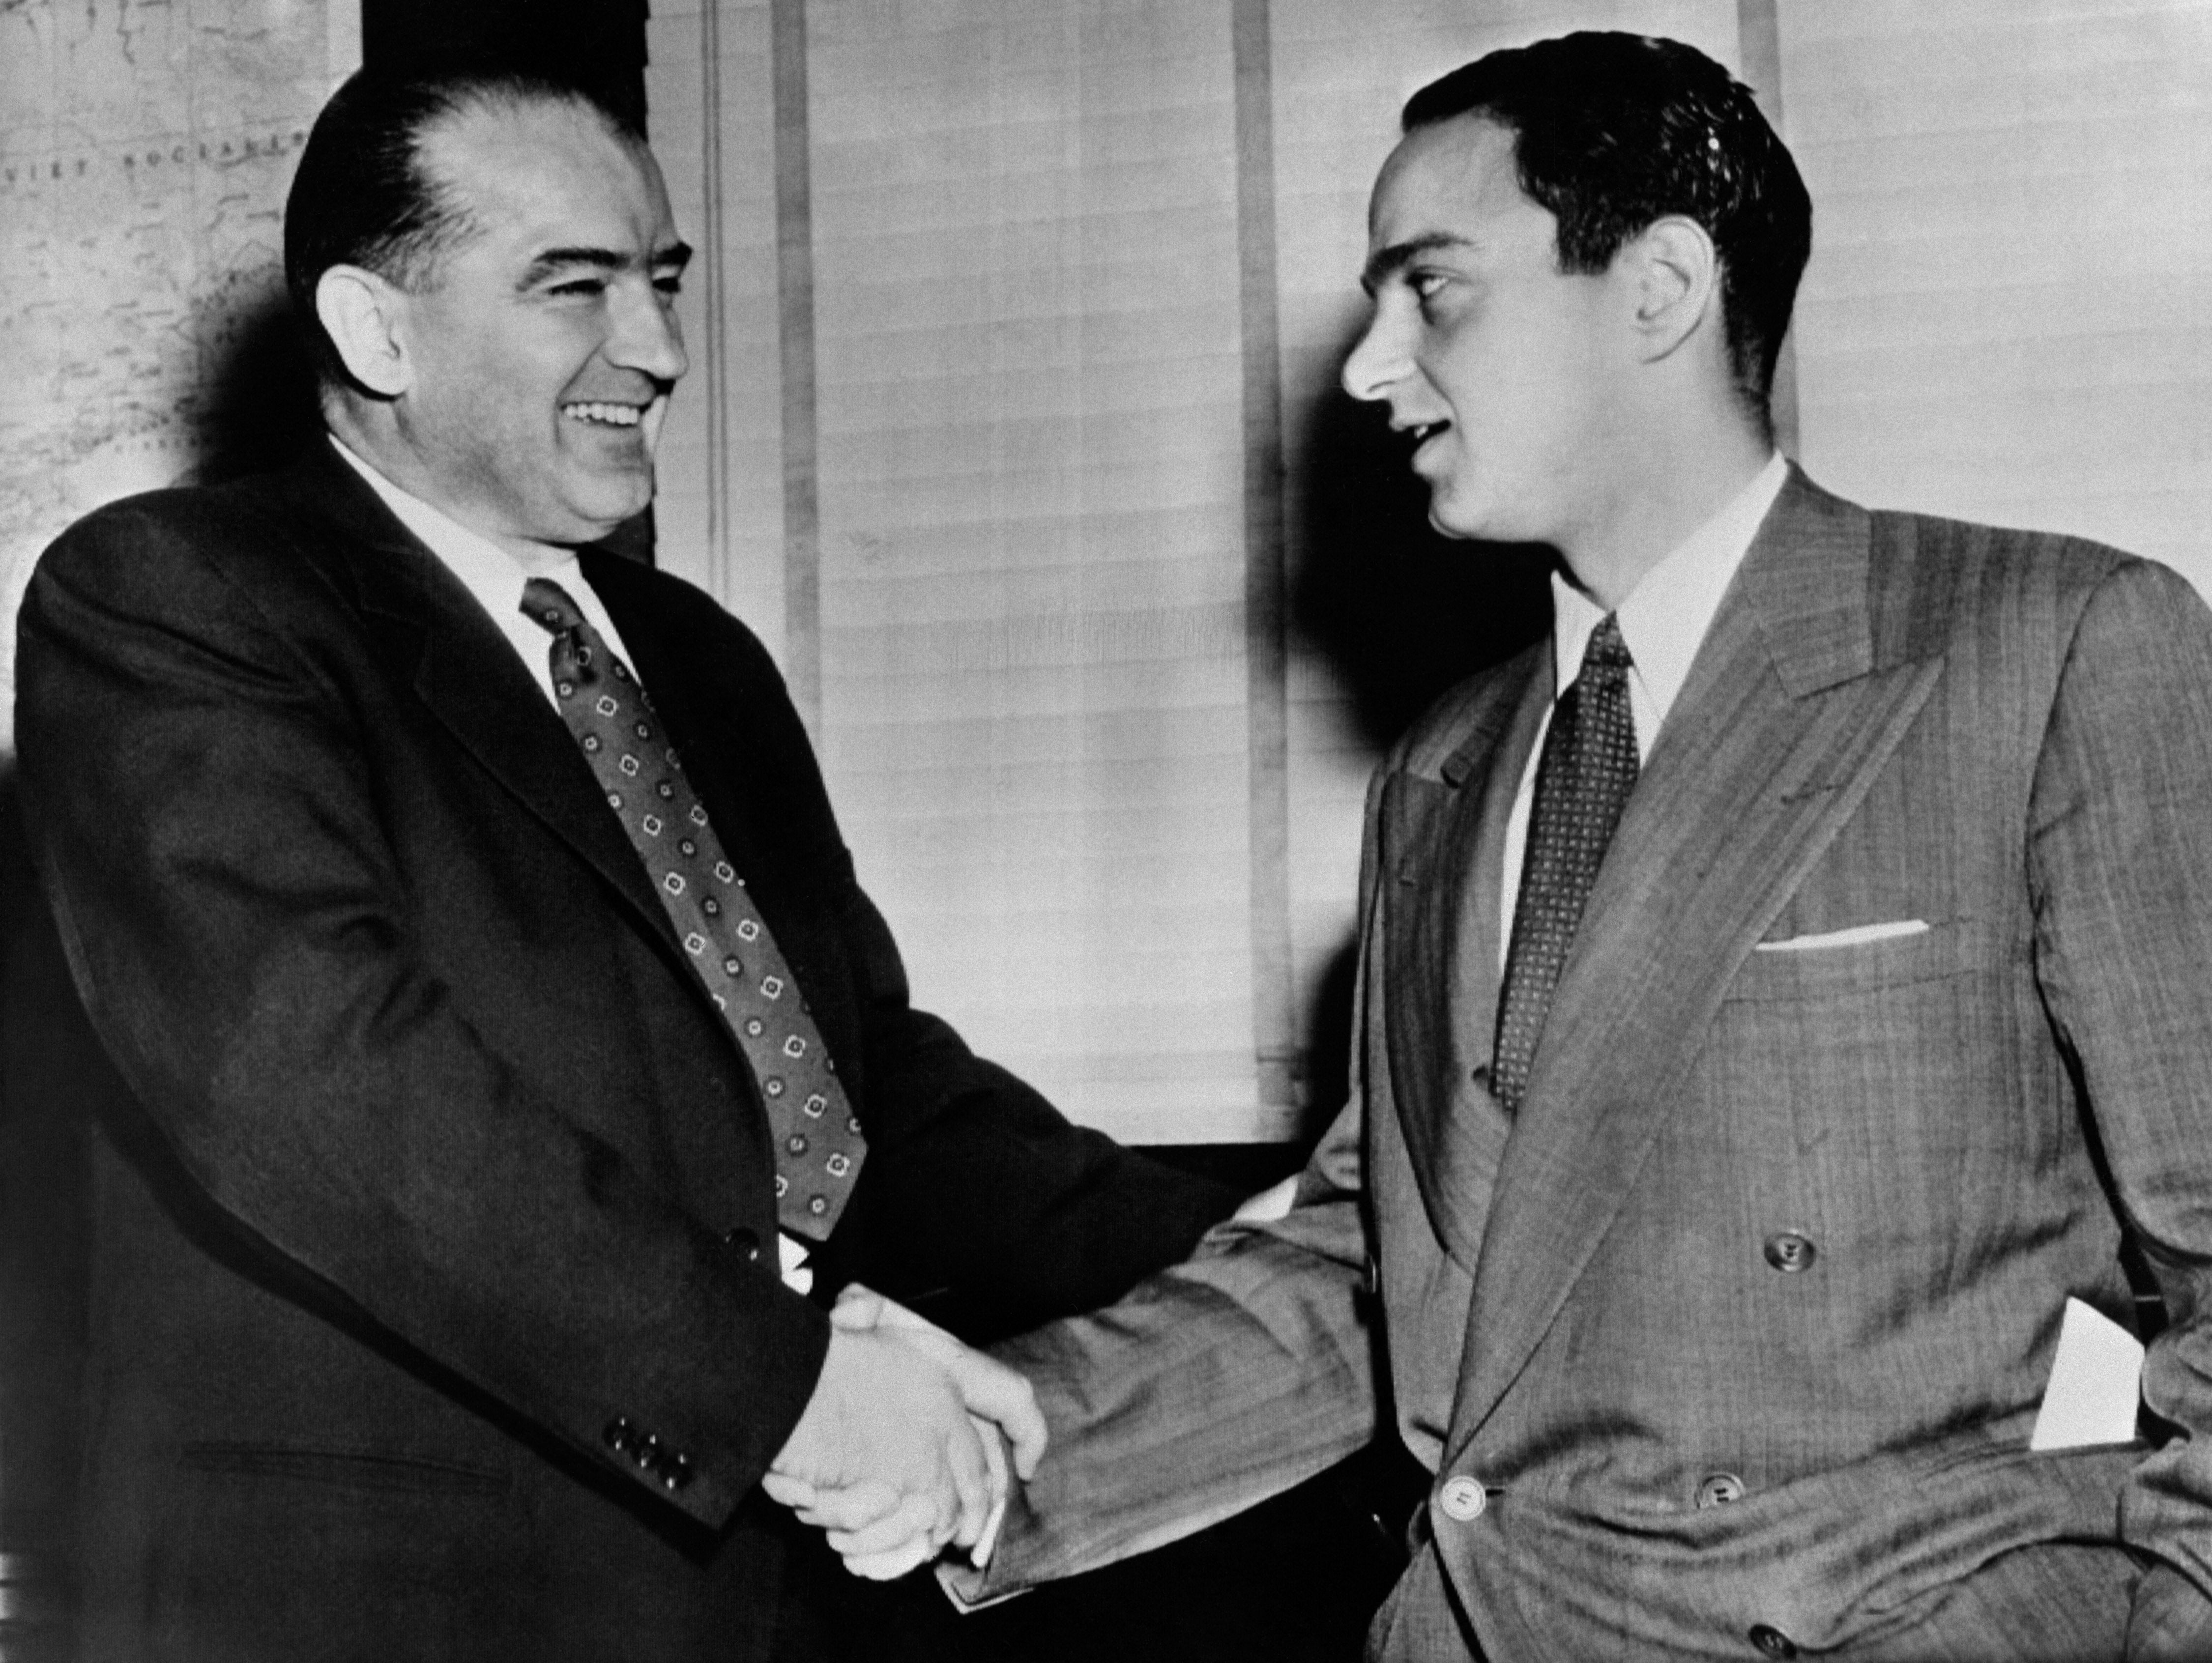 Roy Cohn shakes hands with infamous Sen. Joseph McCarthy; the young and rising New York lawyer served as chief counsel during the infamous anti-Communist hearings and witch-hunts, making him a headline staple